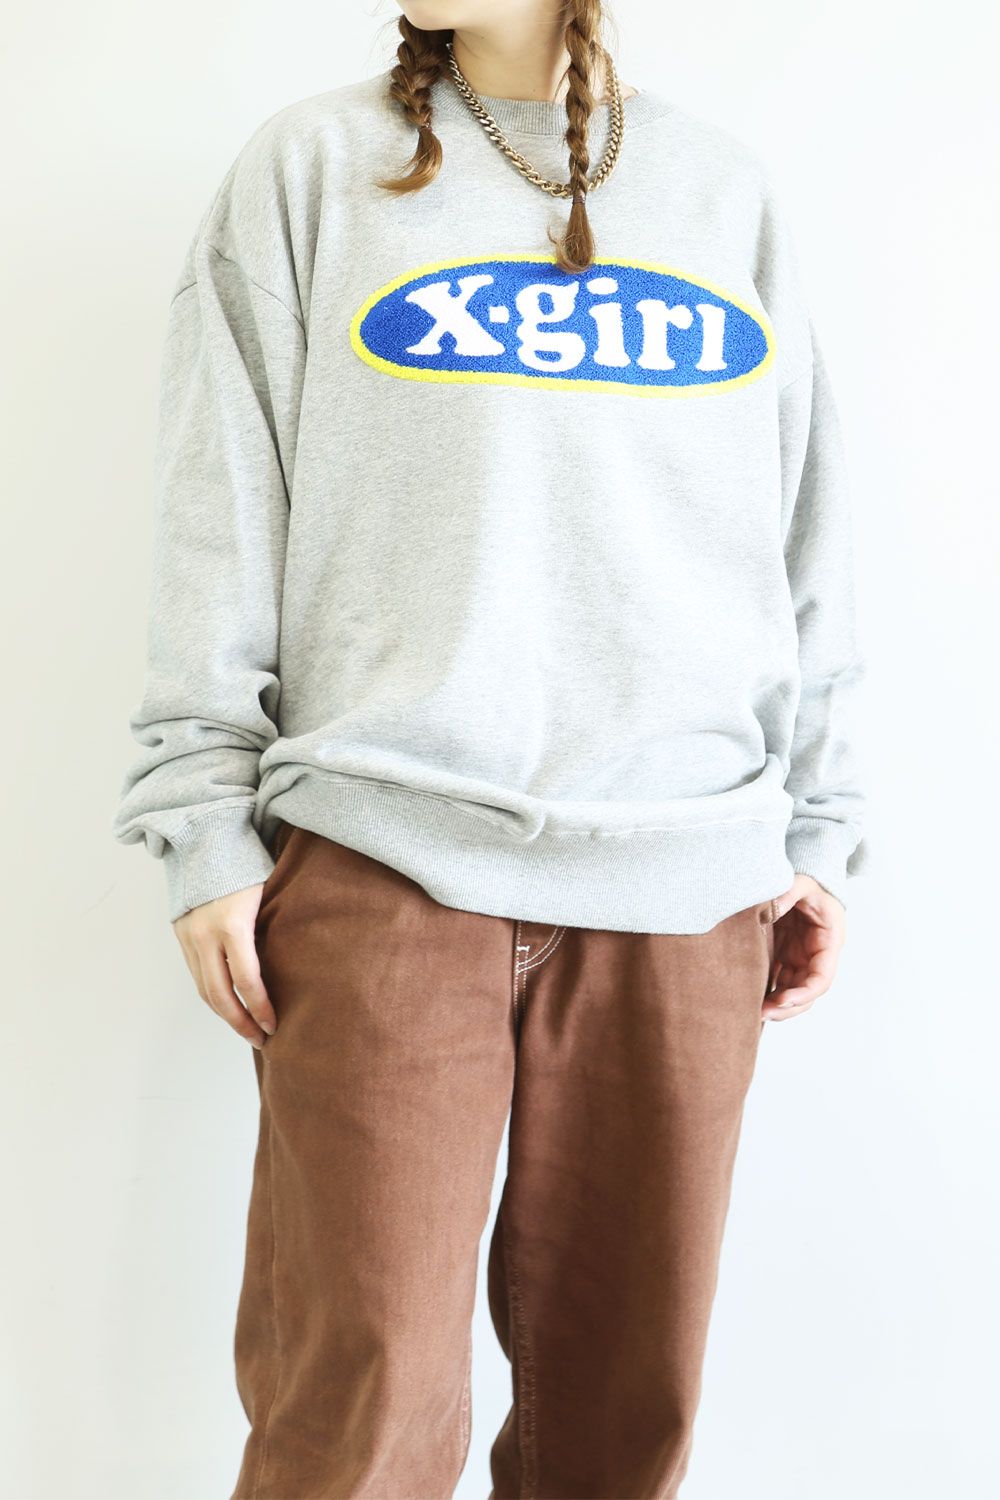 X-girl - CHENILLE EMBROIDERY OVAL LOGO CREW SWEAT TOP ...